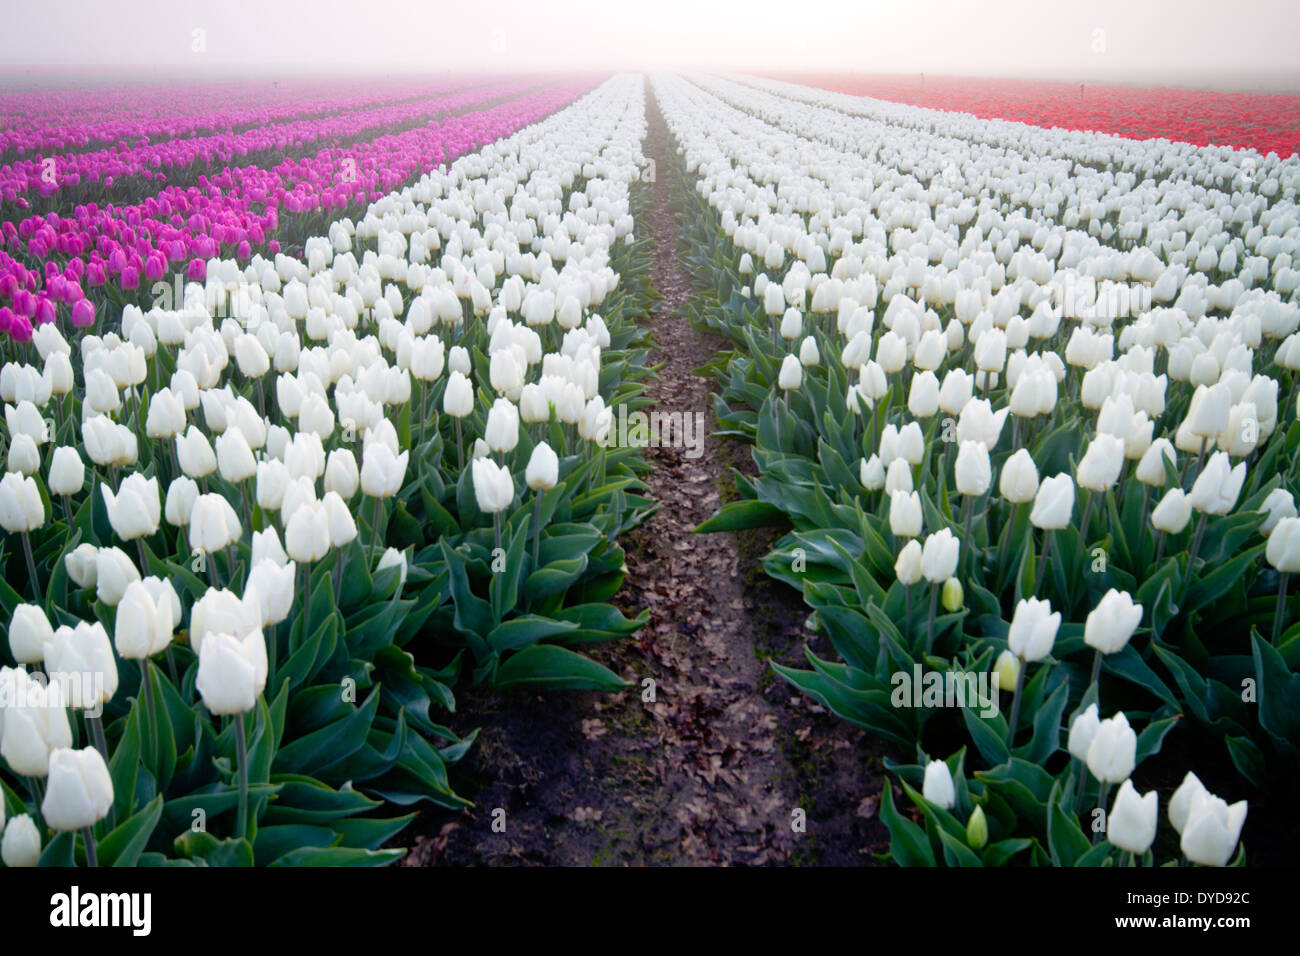 Field with red, white and pink tulips on a misty morning Stock Photo